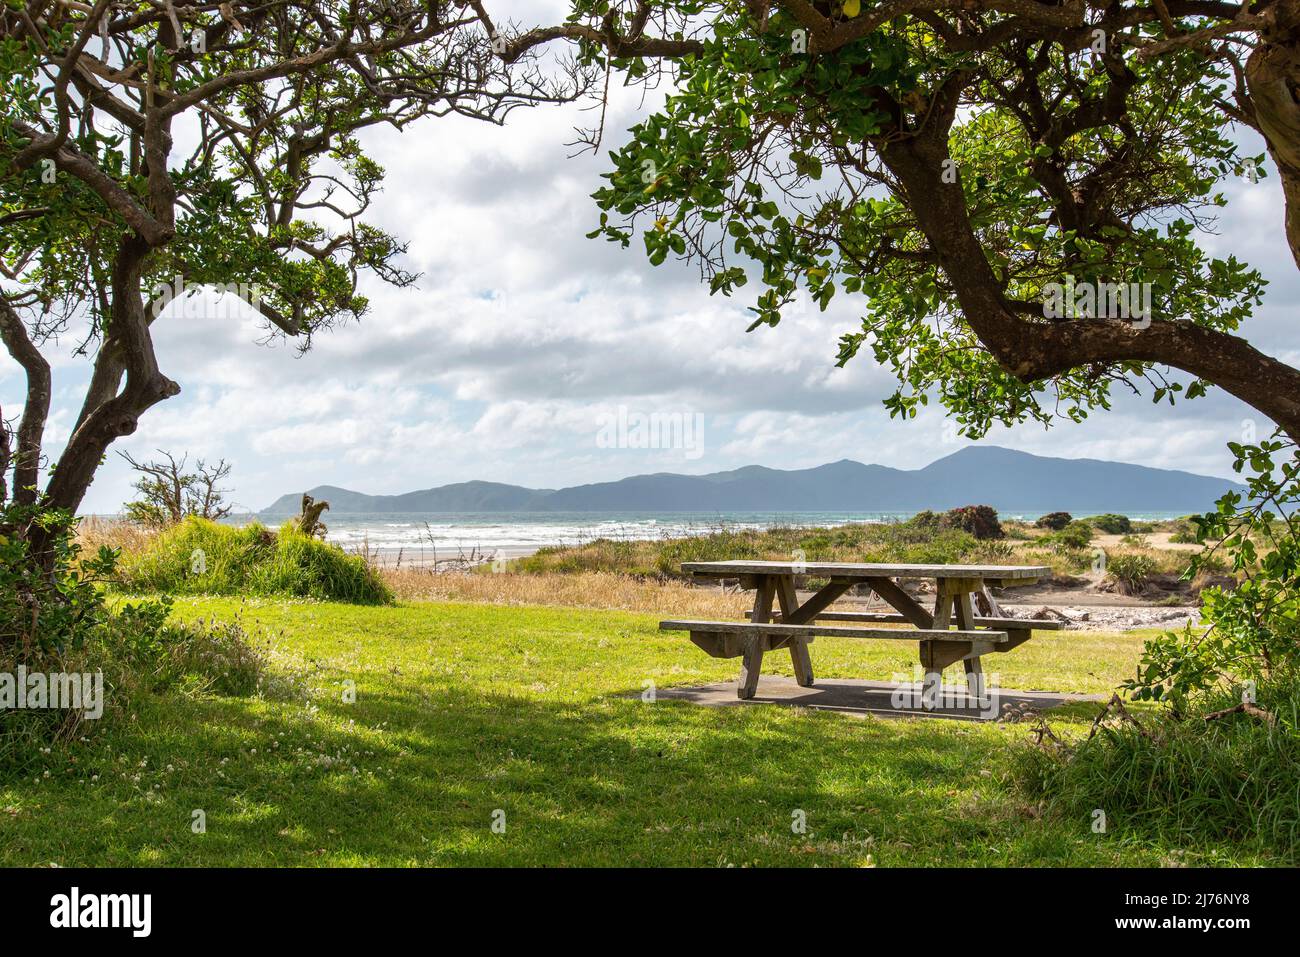 Picnic table at the Pacific coast in Queen Elisabeth Park, North Island of New Zealand Stock Photo